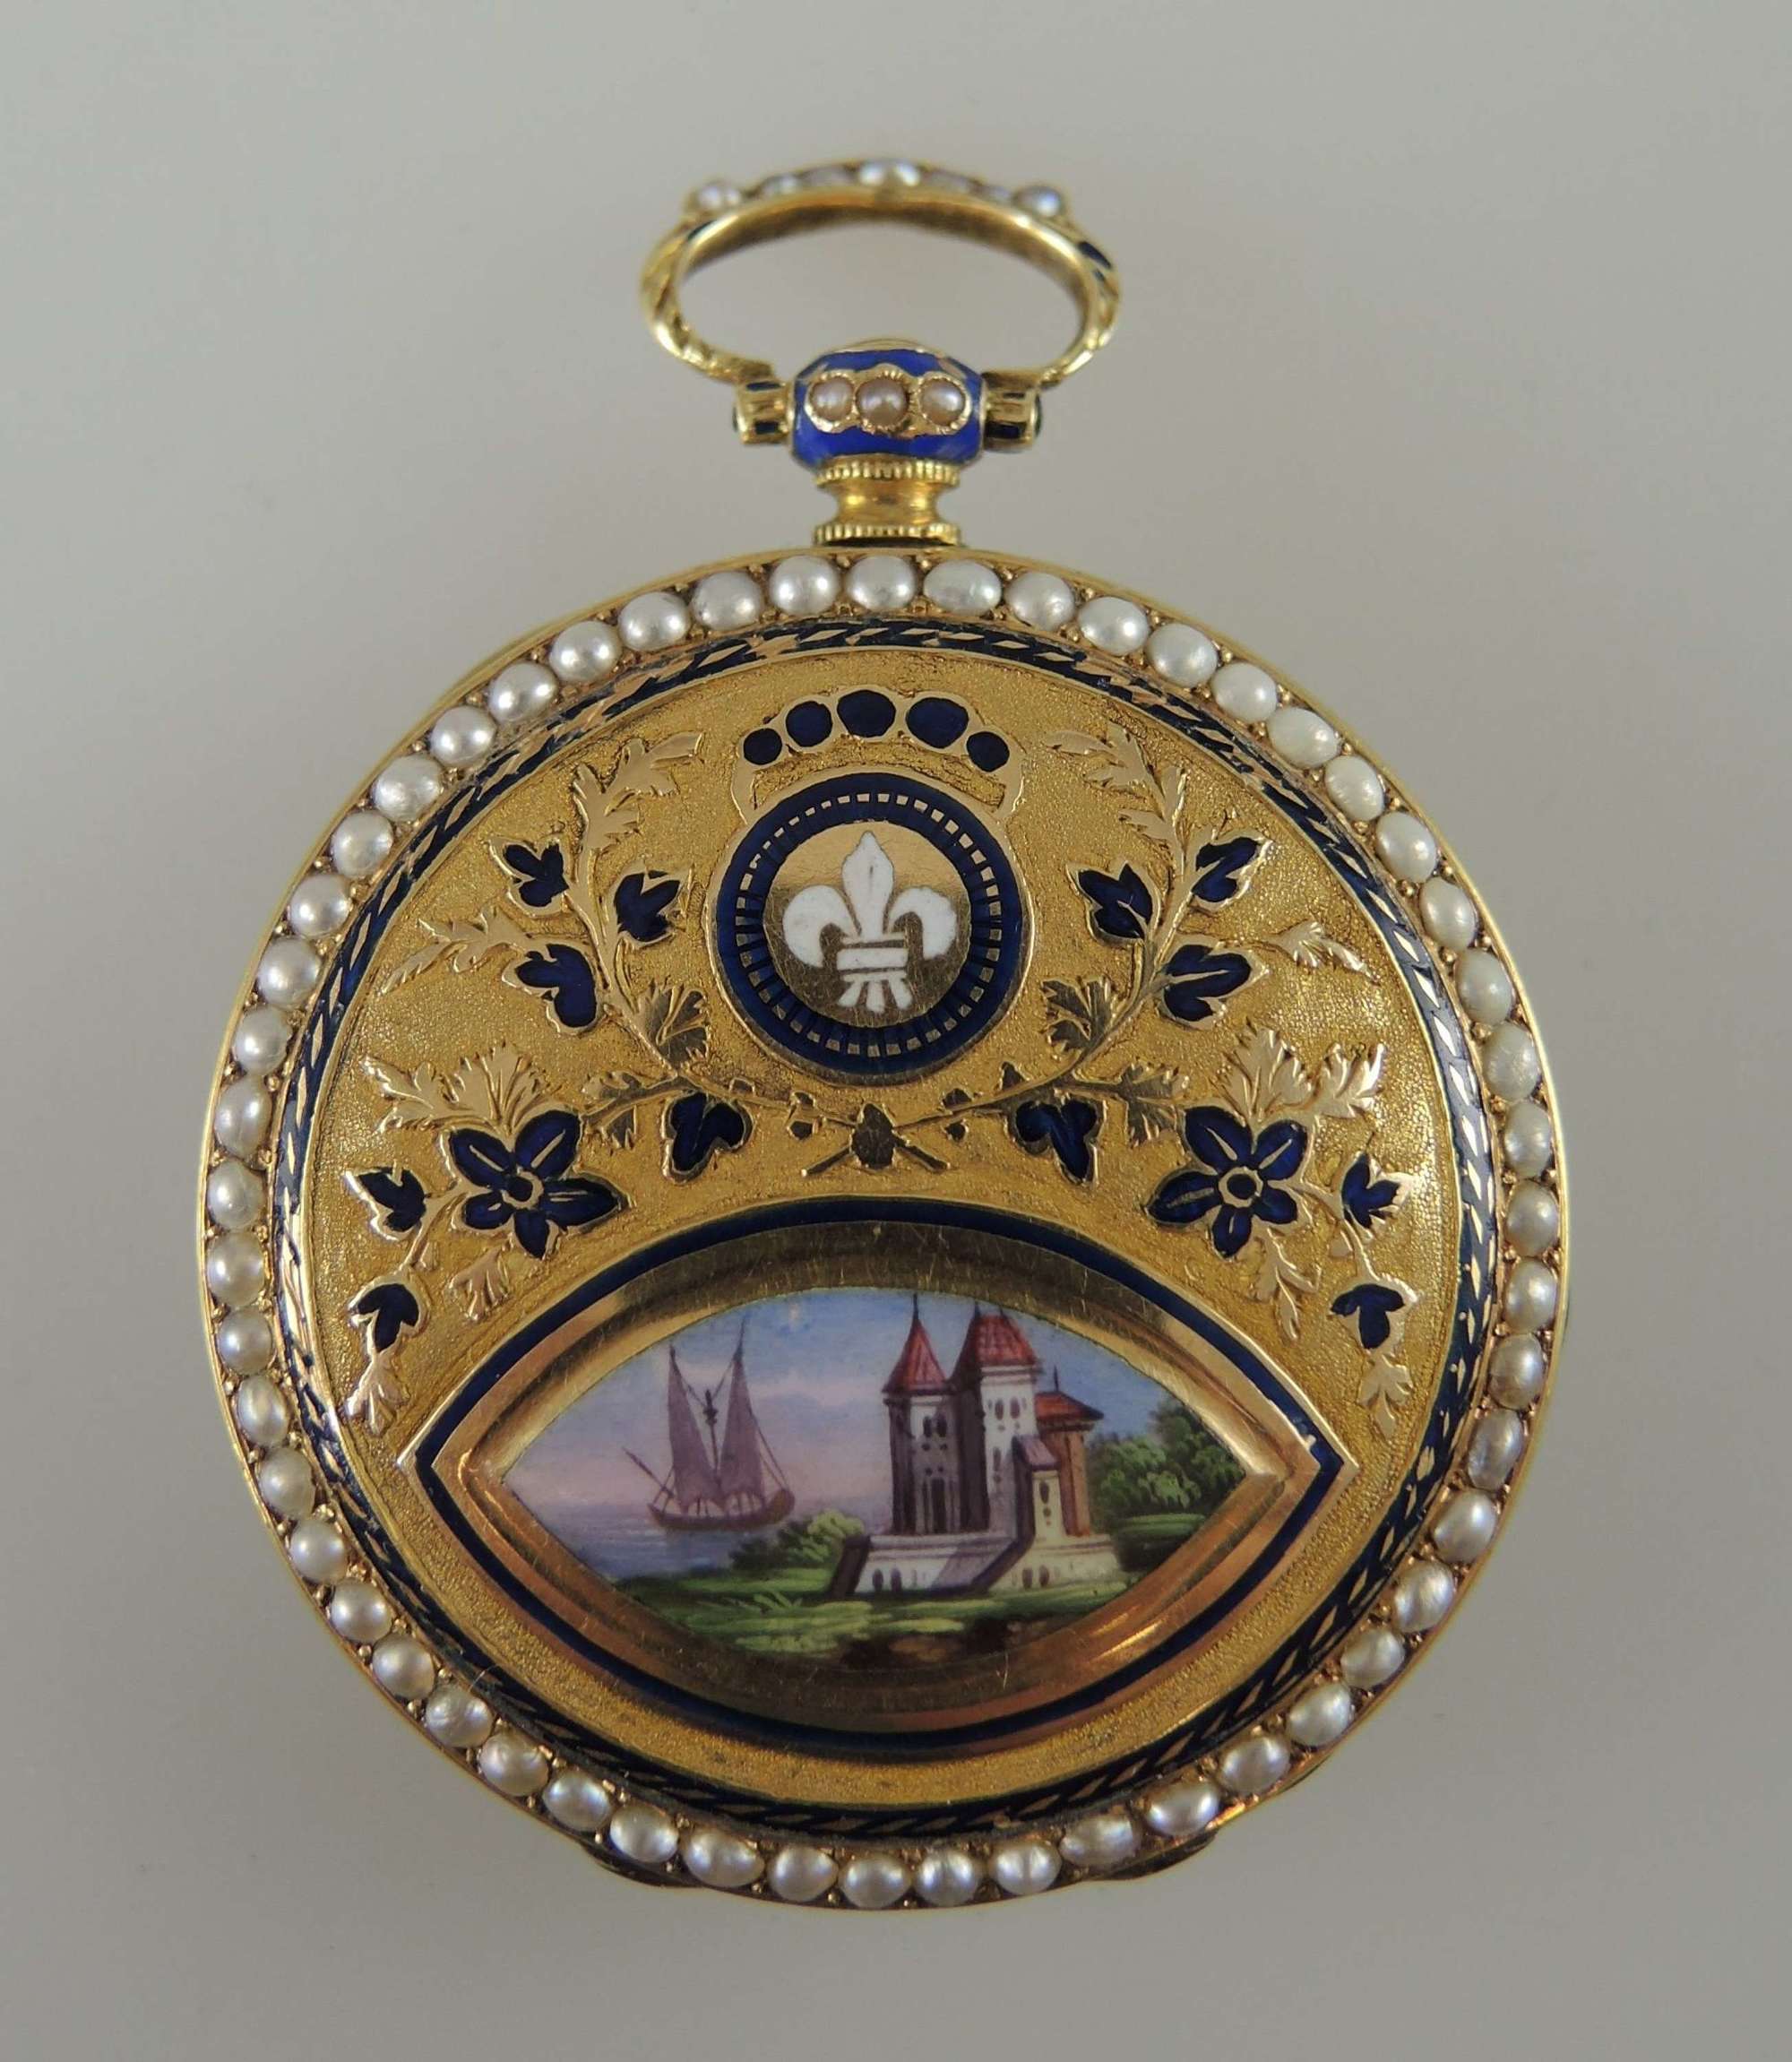 Beautiful 18K gold and enamel pocket watch by H. Capt c1845